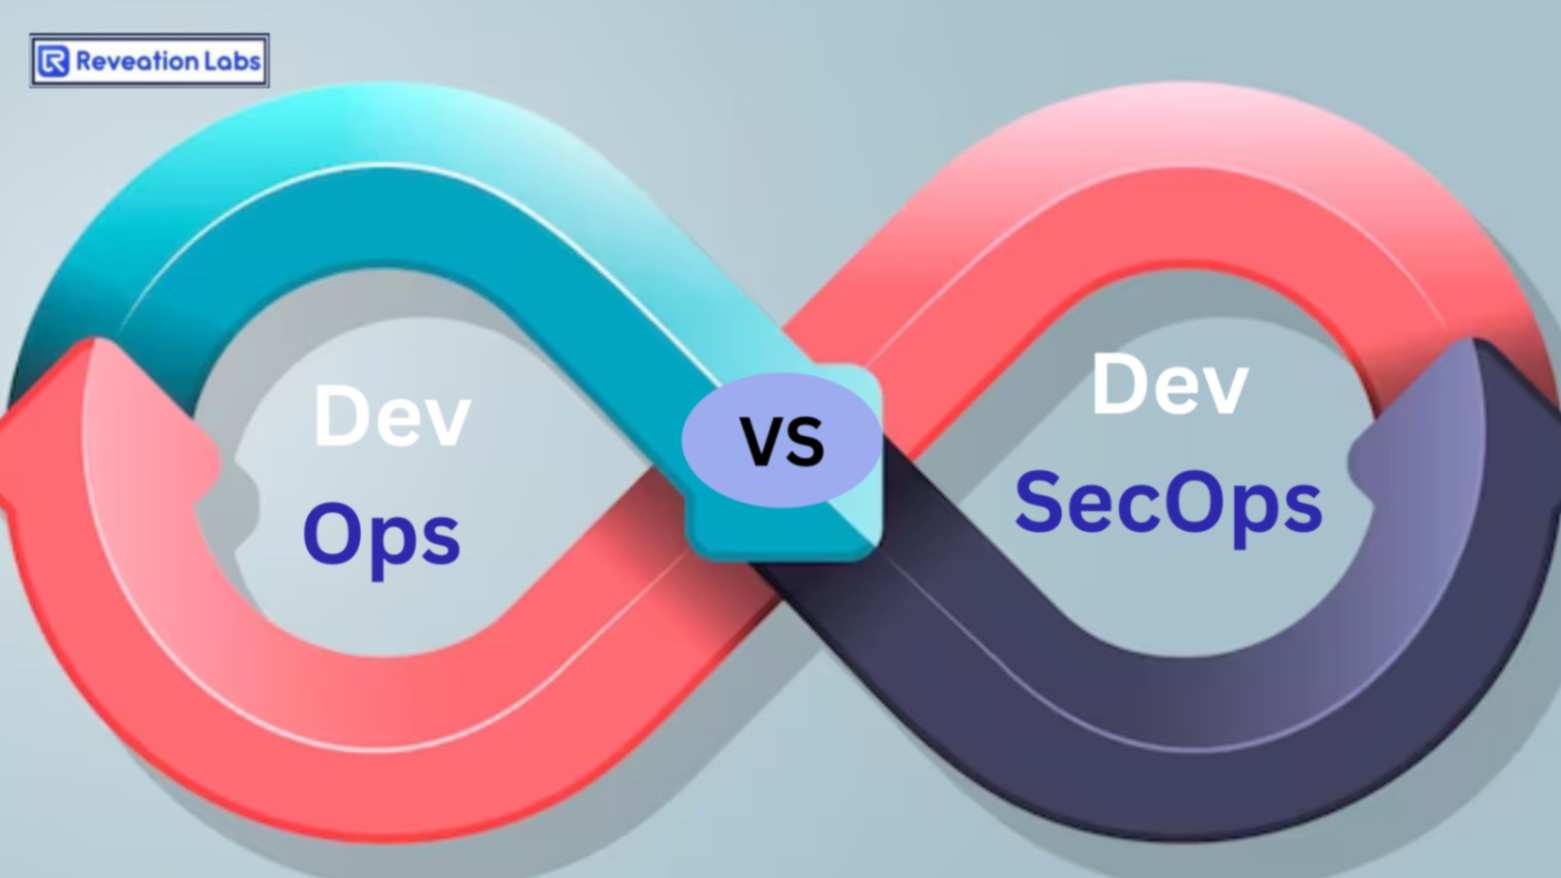 DevOps vs DevSecOps: Balancing Speed and Security in a Fast-Paced World